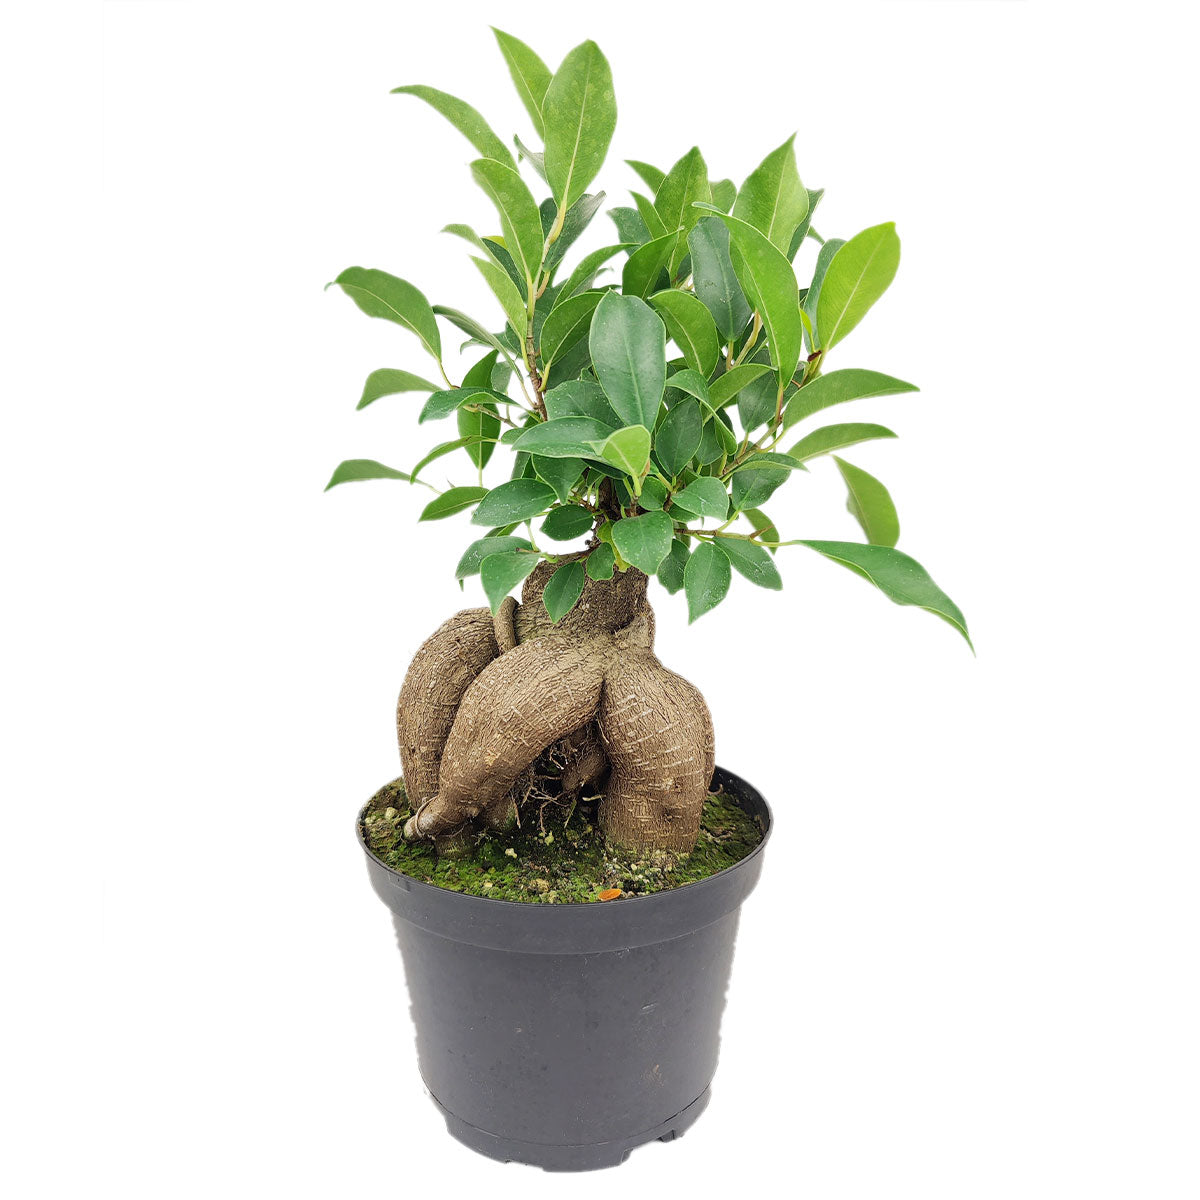 Ficus Ginseng, live 8 inch Ficus Ginseng in plastic pot, buy Ficus Ginseng online, Ficus Ginseng sale online, houseplant decor ideas